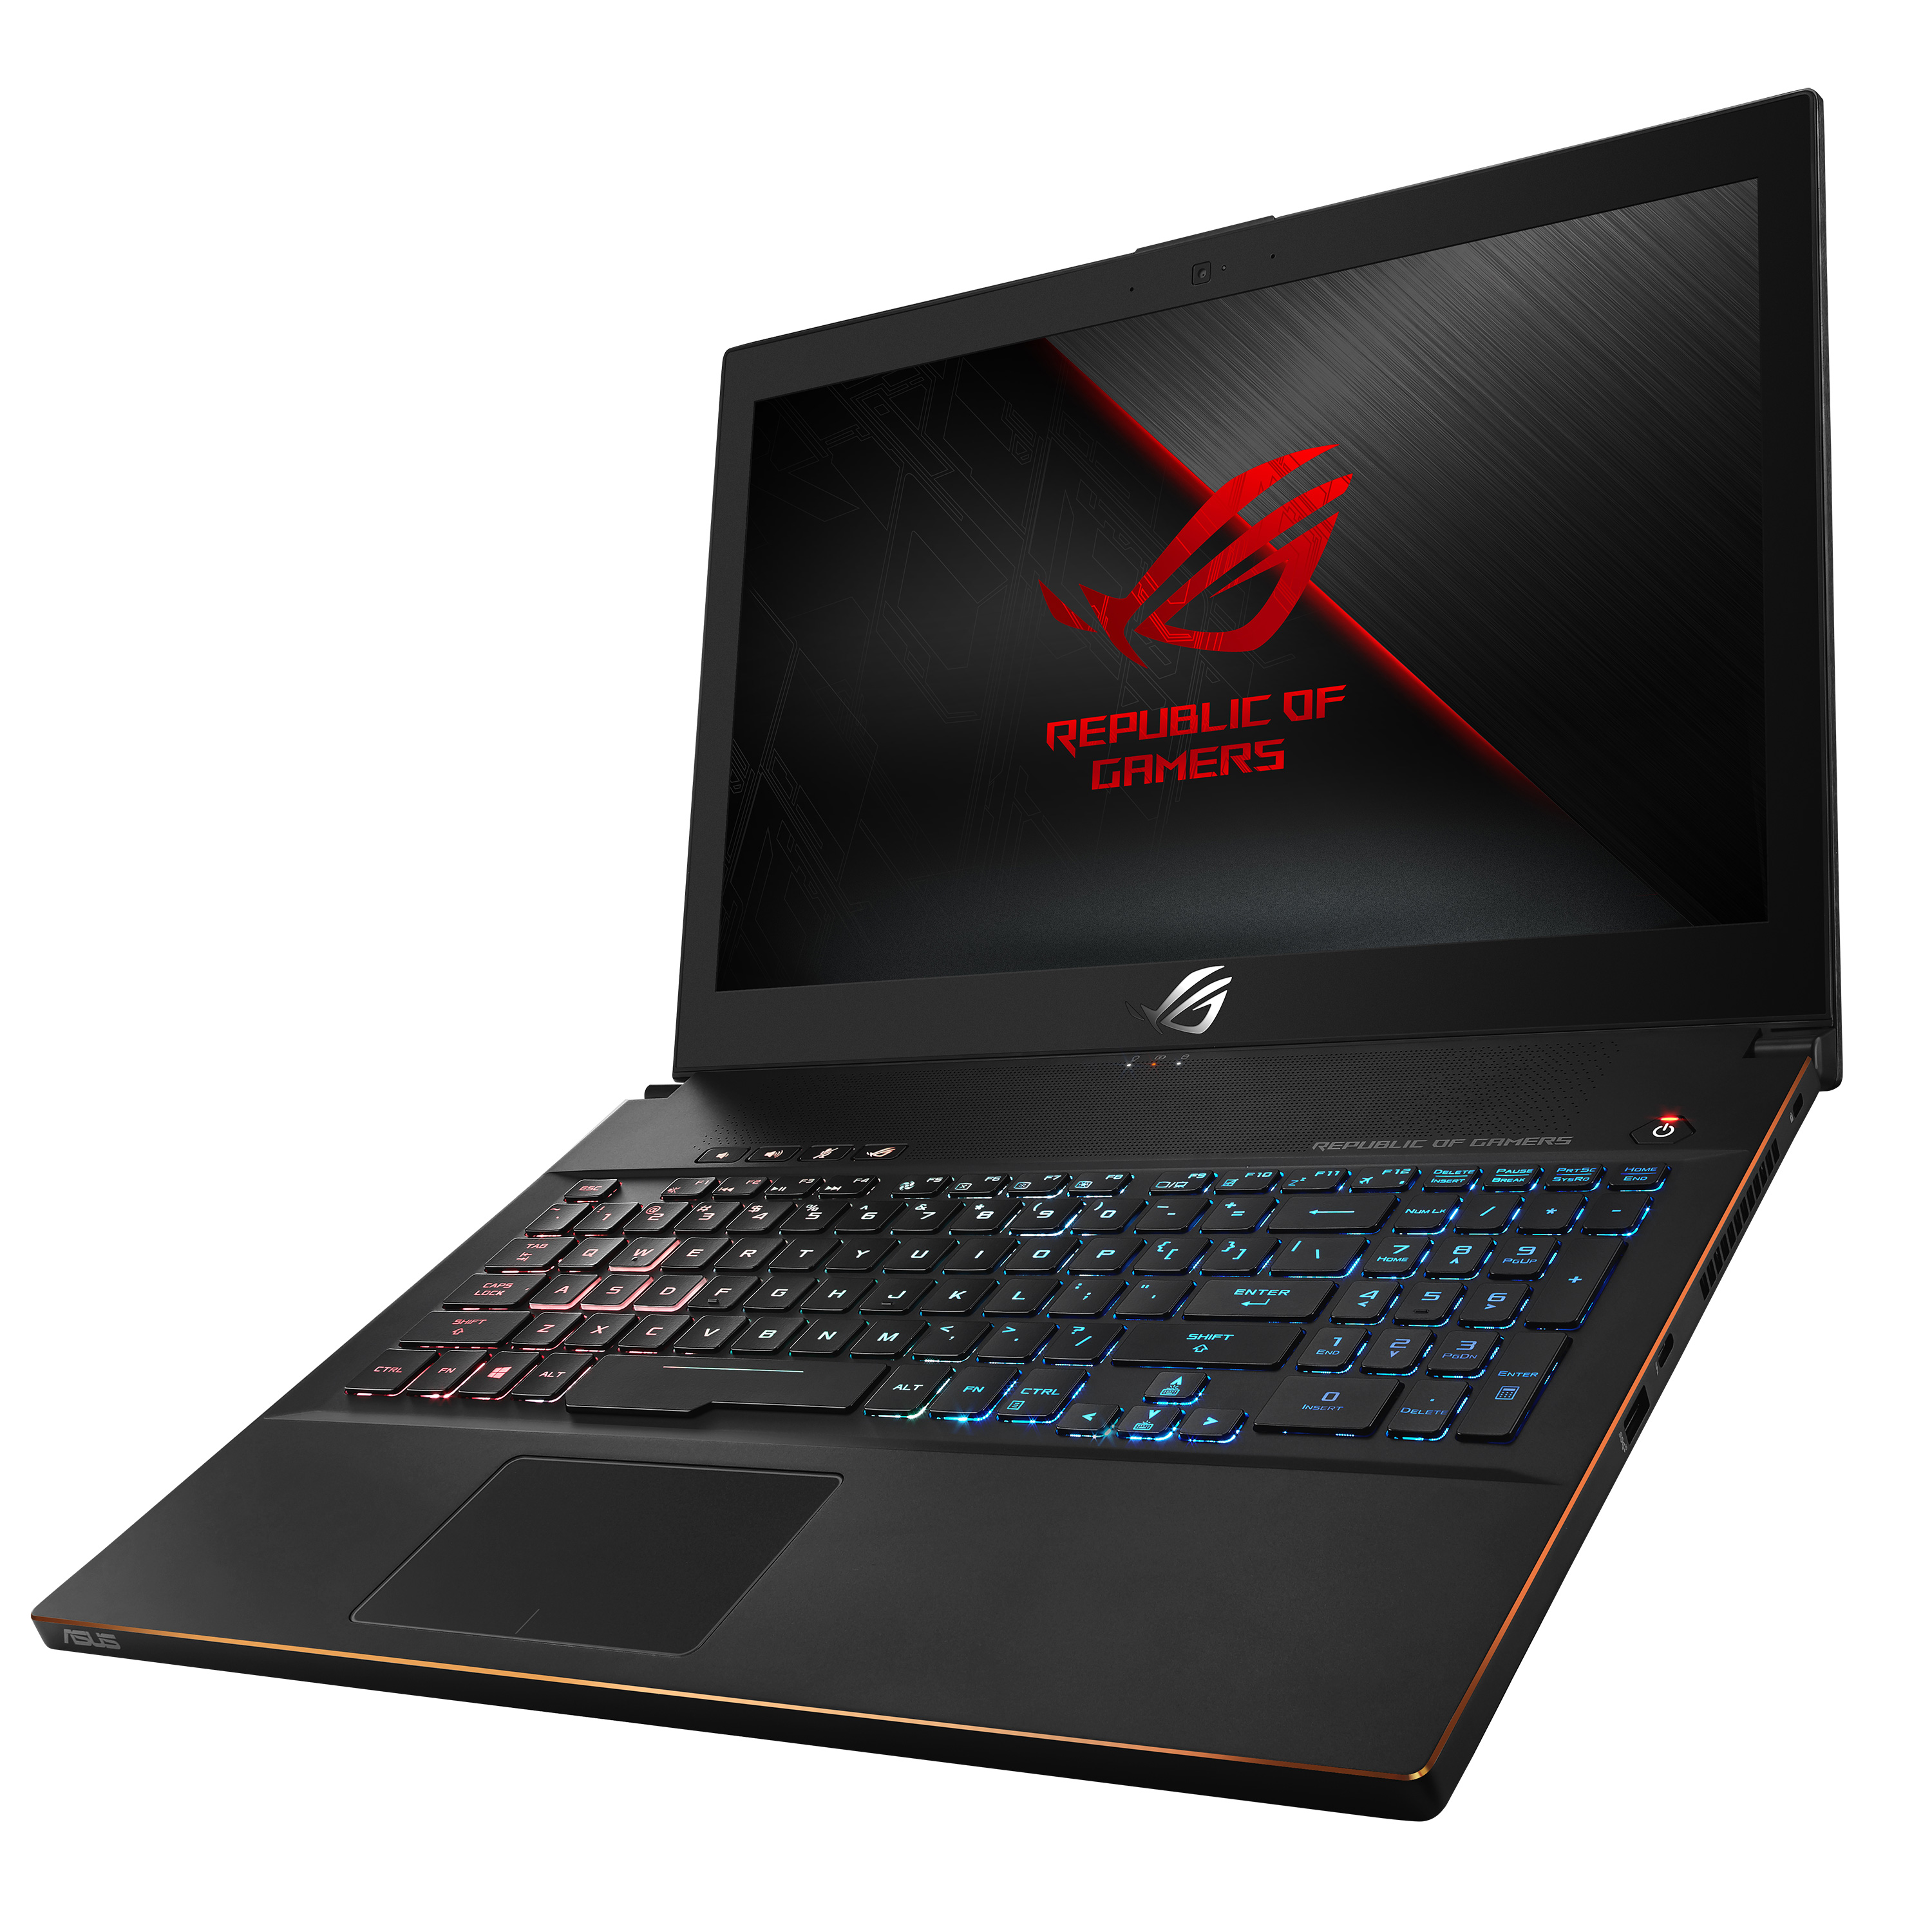 ASUS Launches ROG Zephyrus M (GM501): A More Traditional Flagship